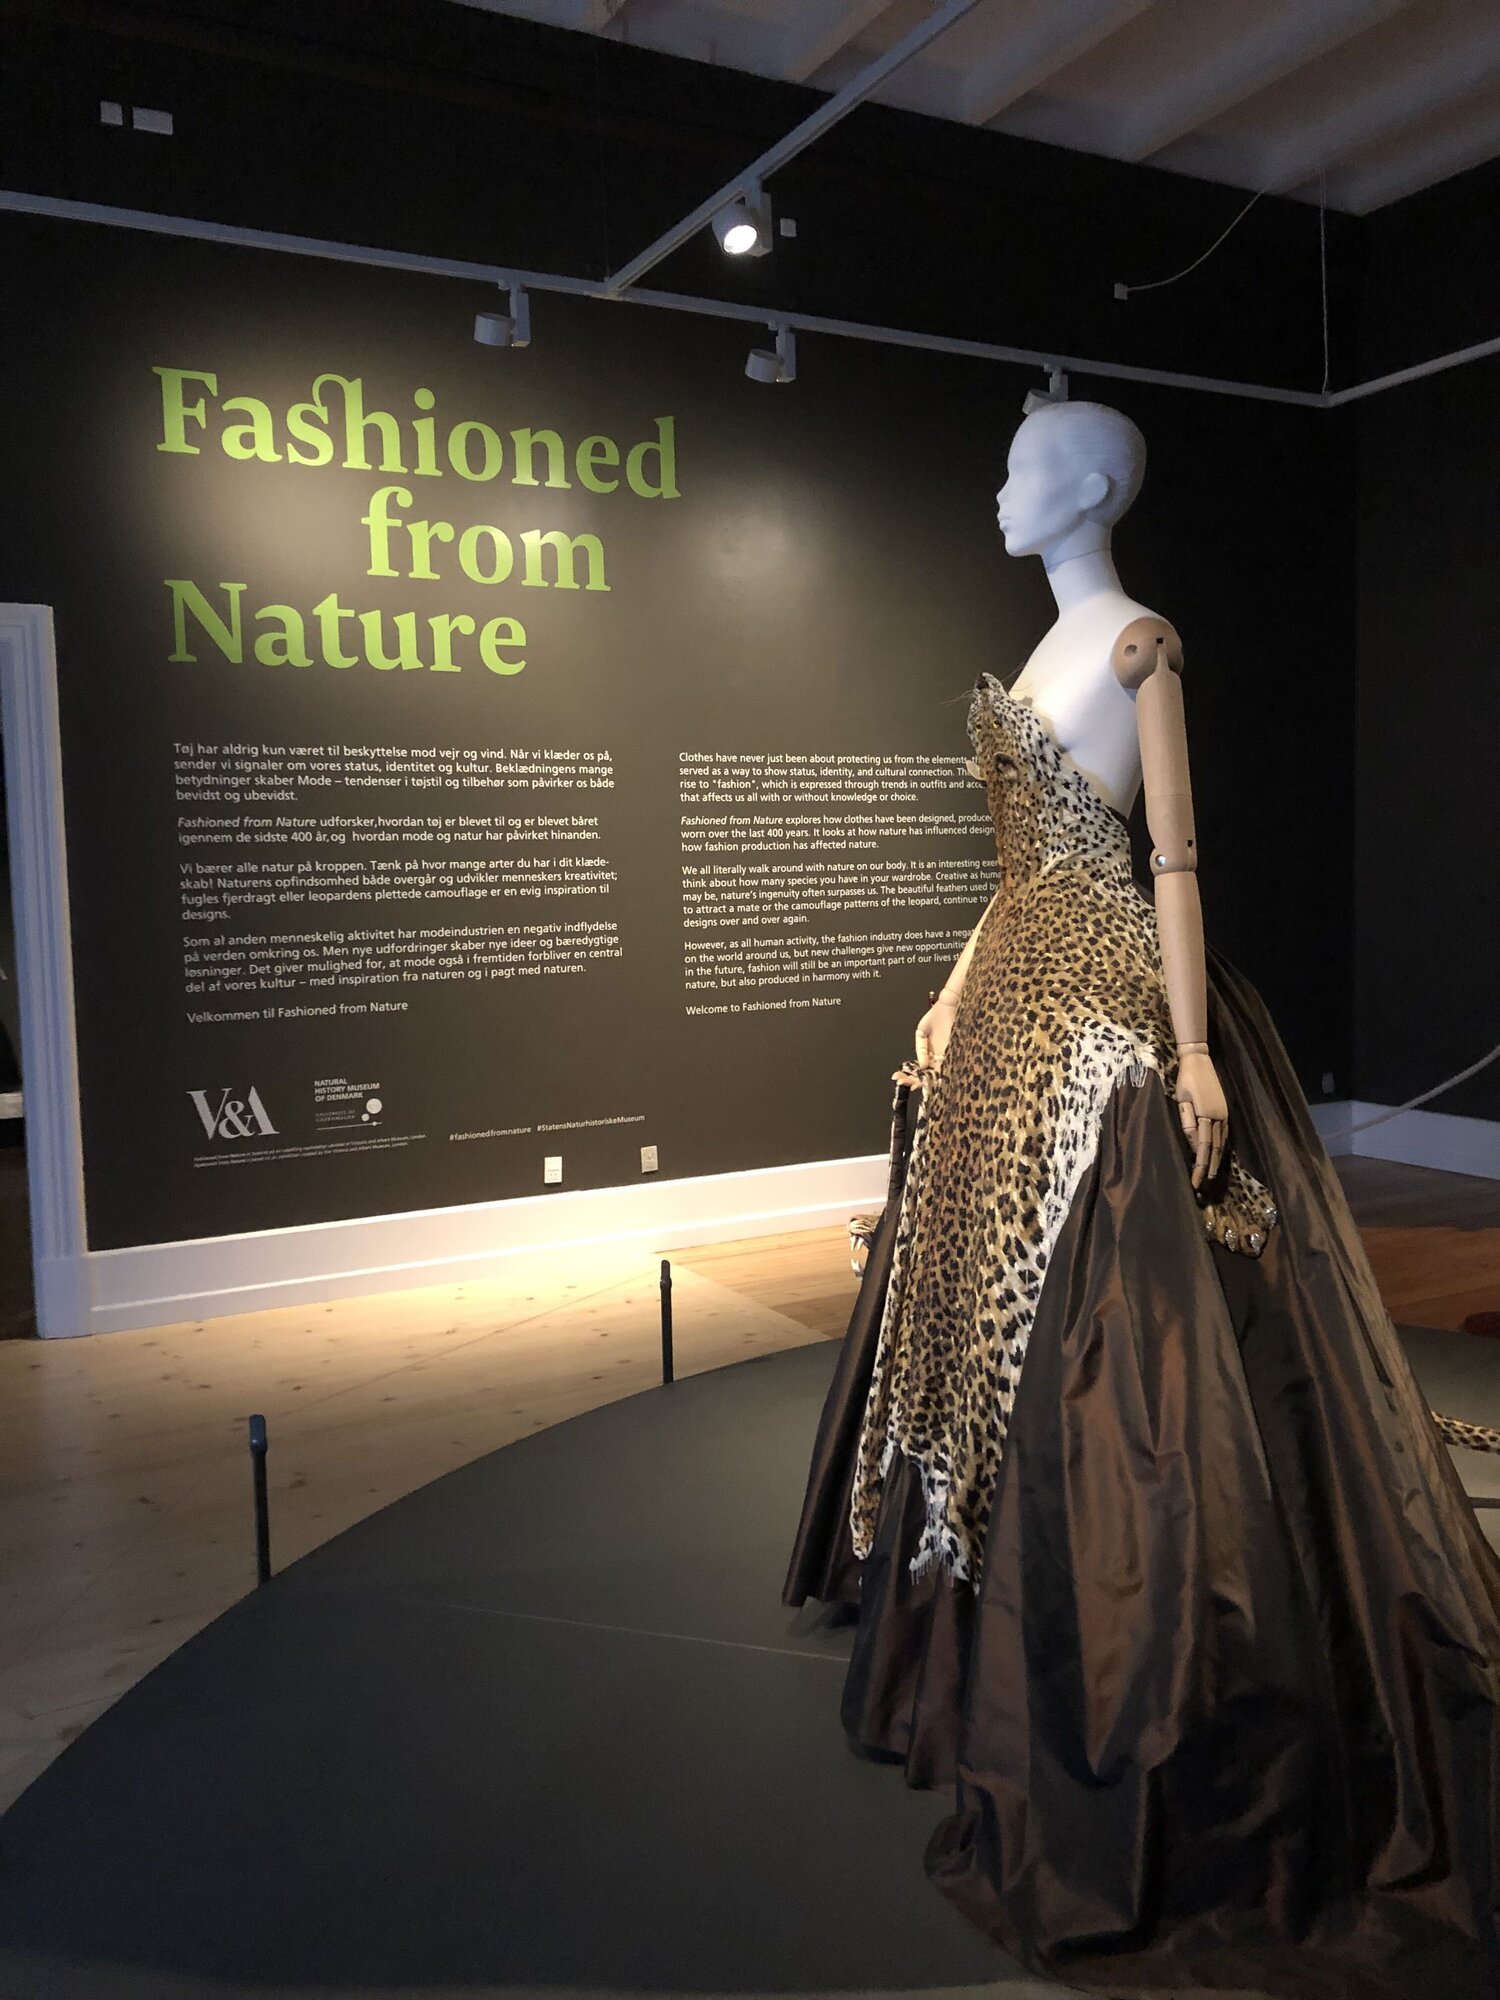 The Fashioned from Nature exhibit I walked through in Copenhagen, Denmark explored the complex relationship between fashion and nature.